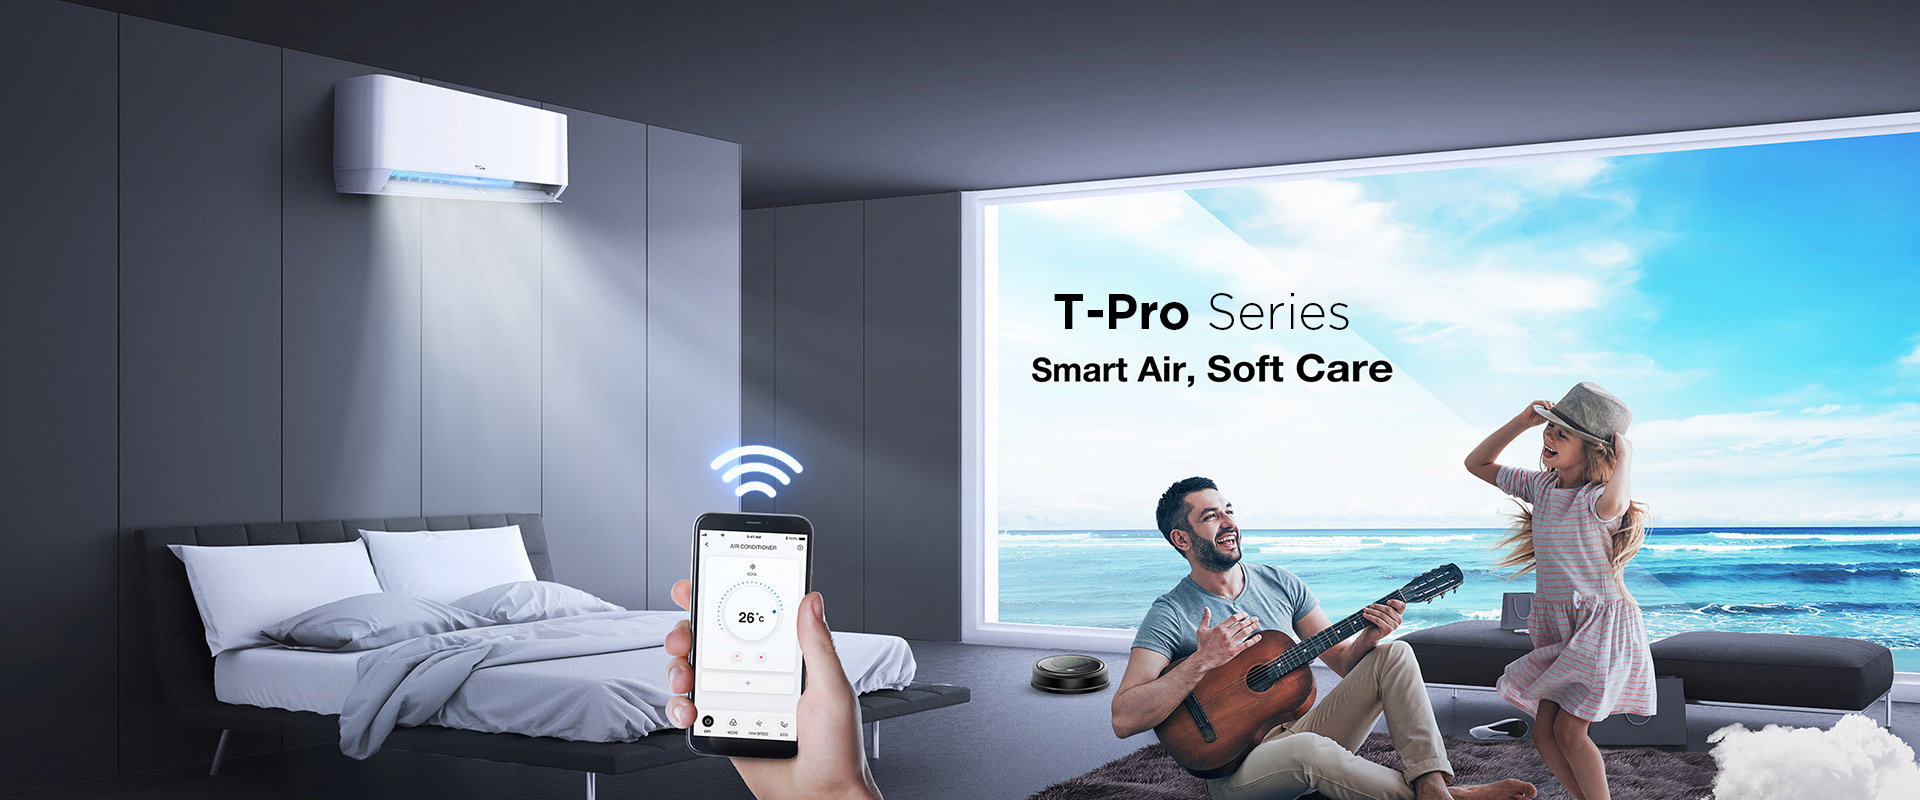 T-Pro Series - Smart Air, Soft Care 